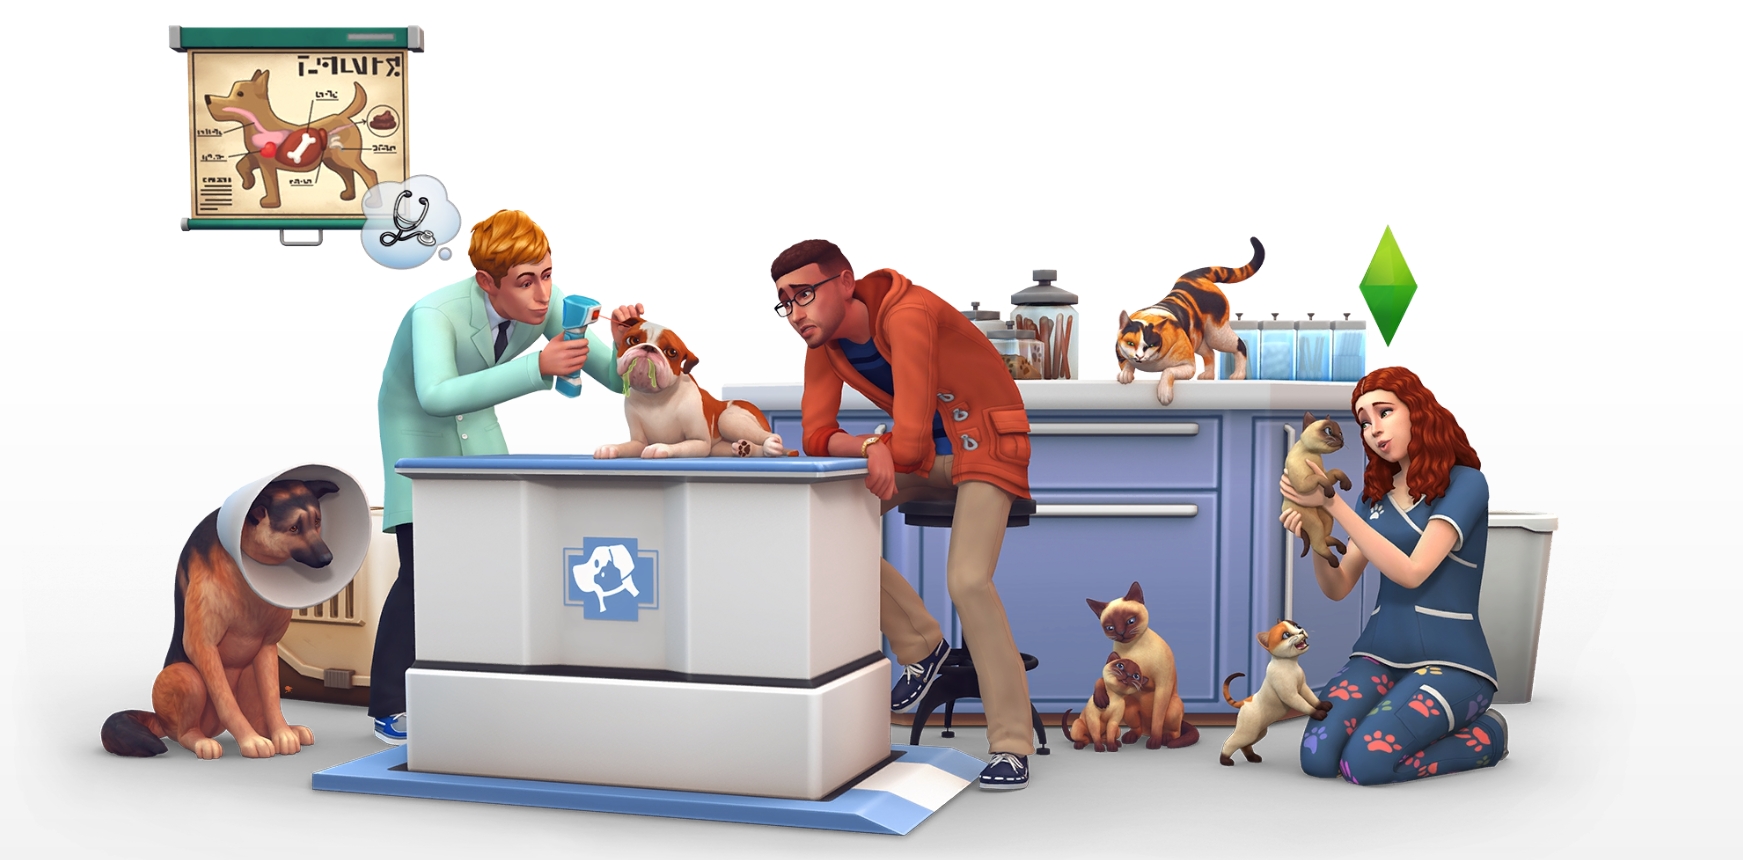 The Sims 4 Pets Cats And Dogs Expansion Pack Guide,Kids Dictionary Book